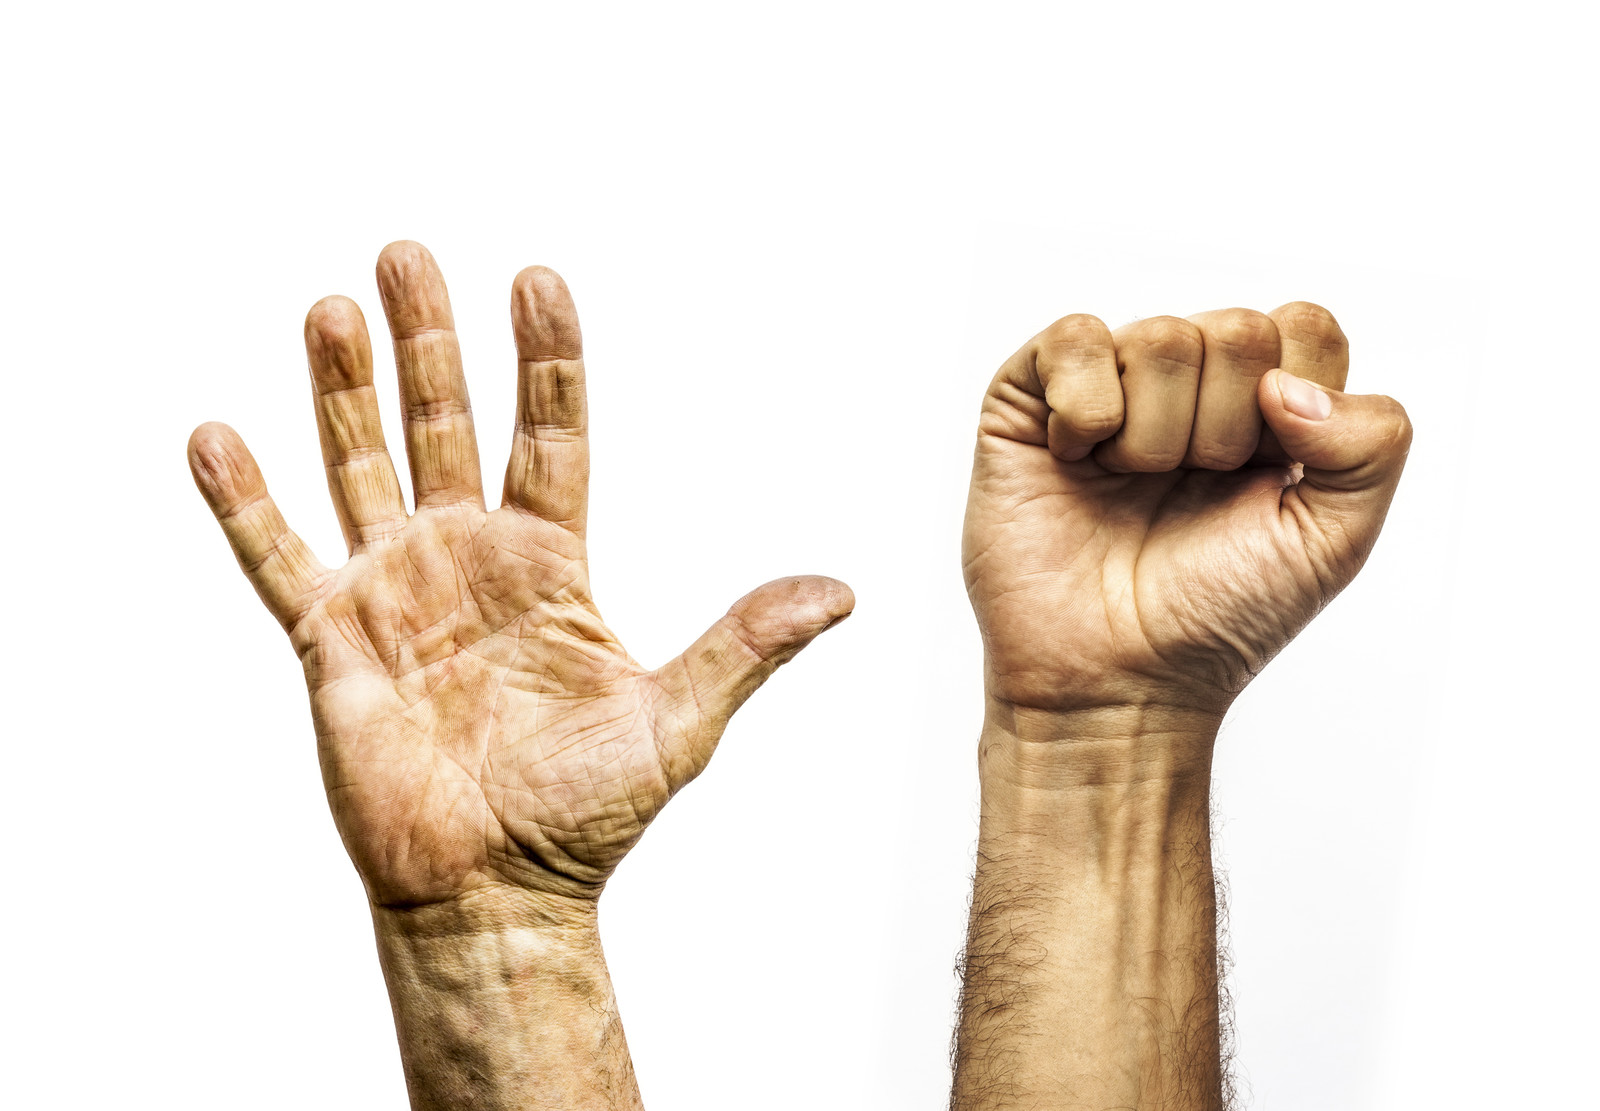 Contemporary Christianity: Clenched Fist or Open Hand?